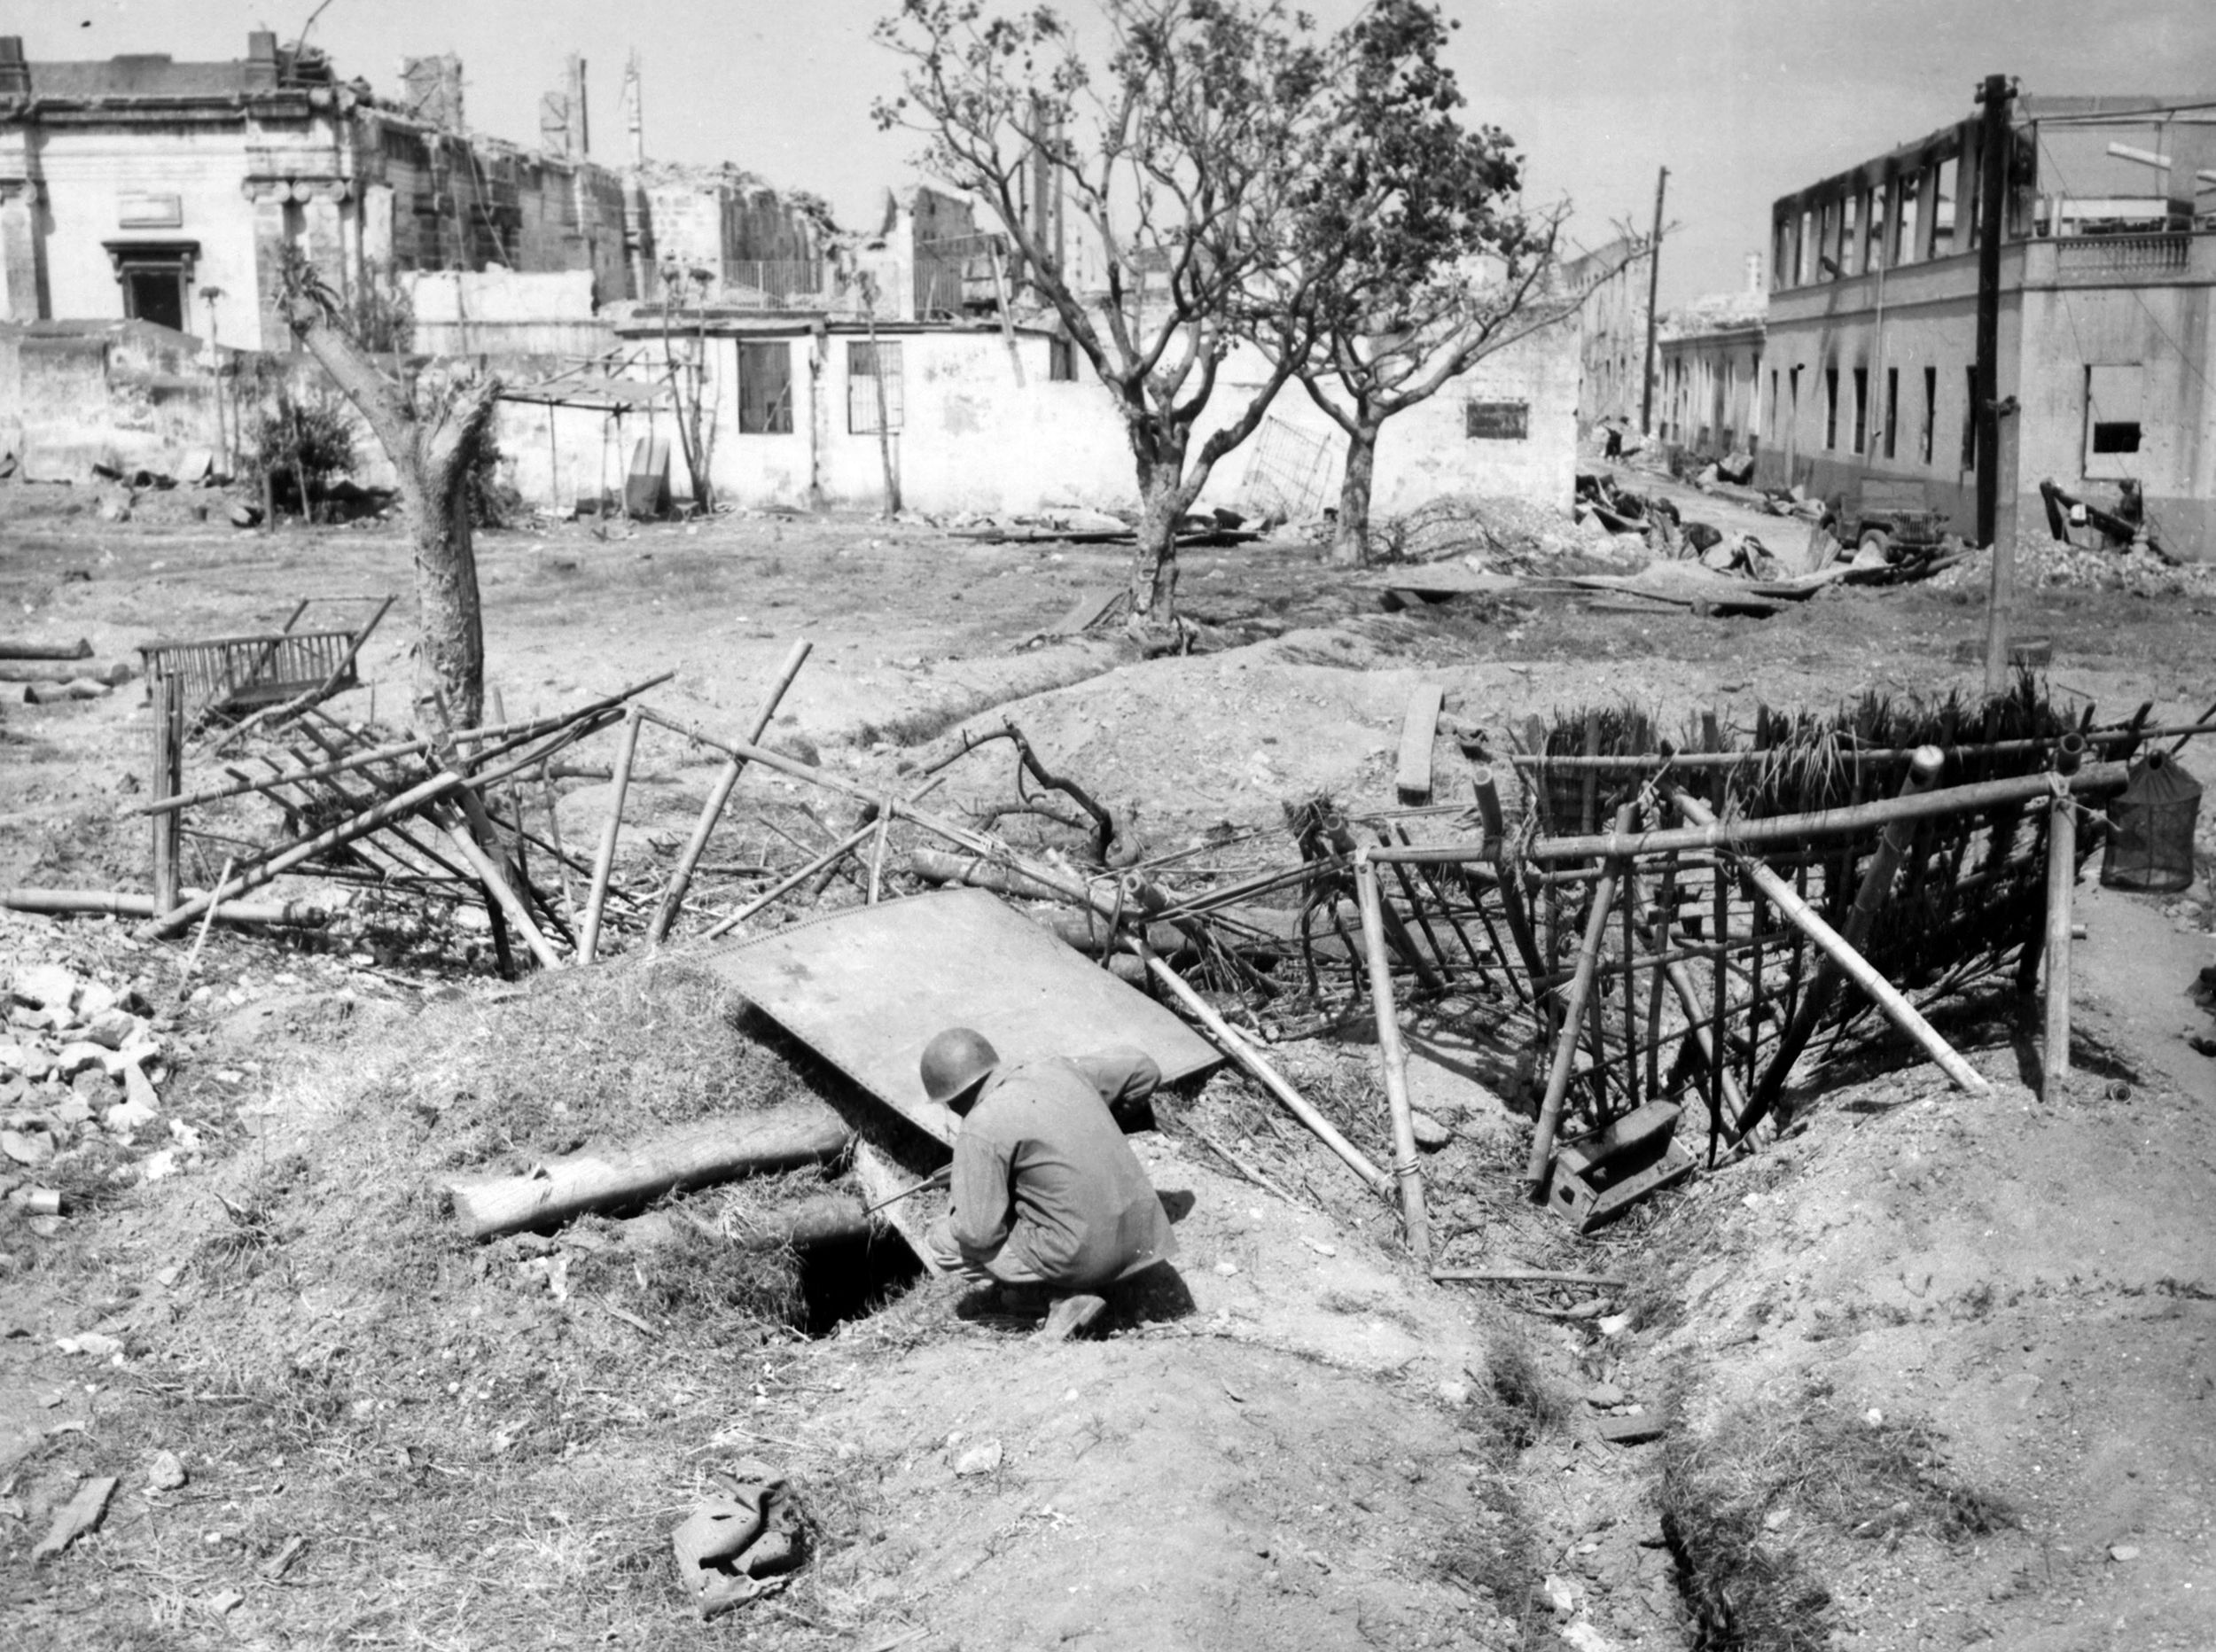 The Japanese had prepared substantial defenses at the Intramuros in Manila, and many of them were willing to die in the subsequent fighting. American troops were compelled to search house to house through the maze of defenses, continually under fire, and kill 67 Japanese soldiers before the positions pictured were secured.